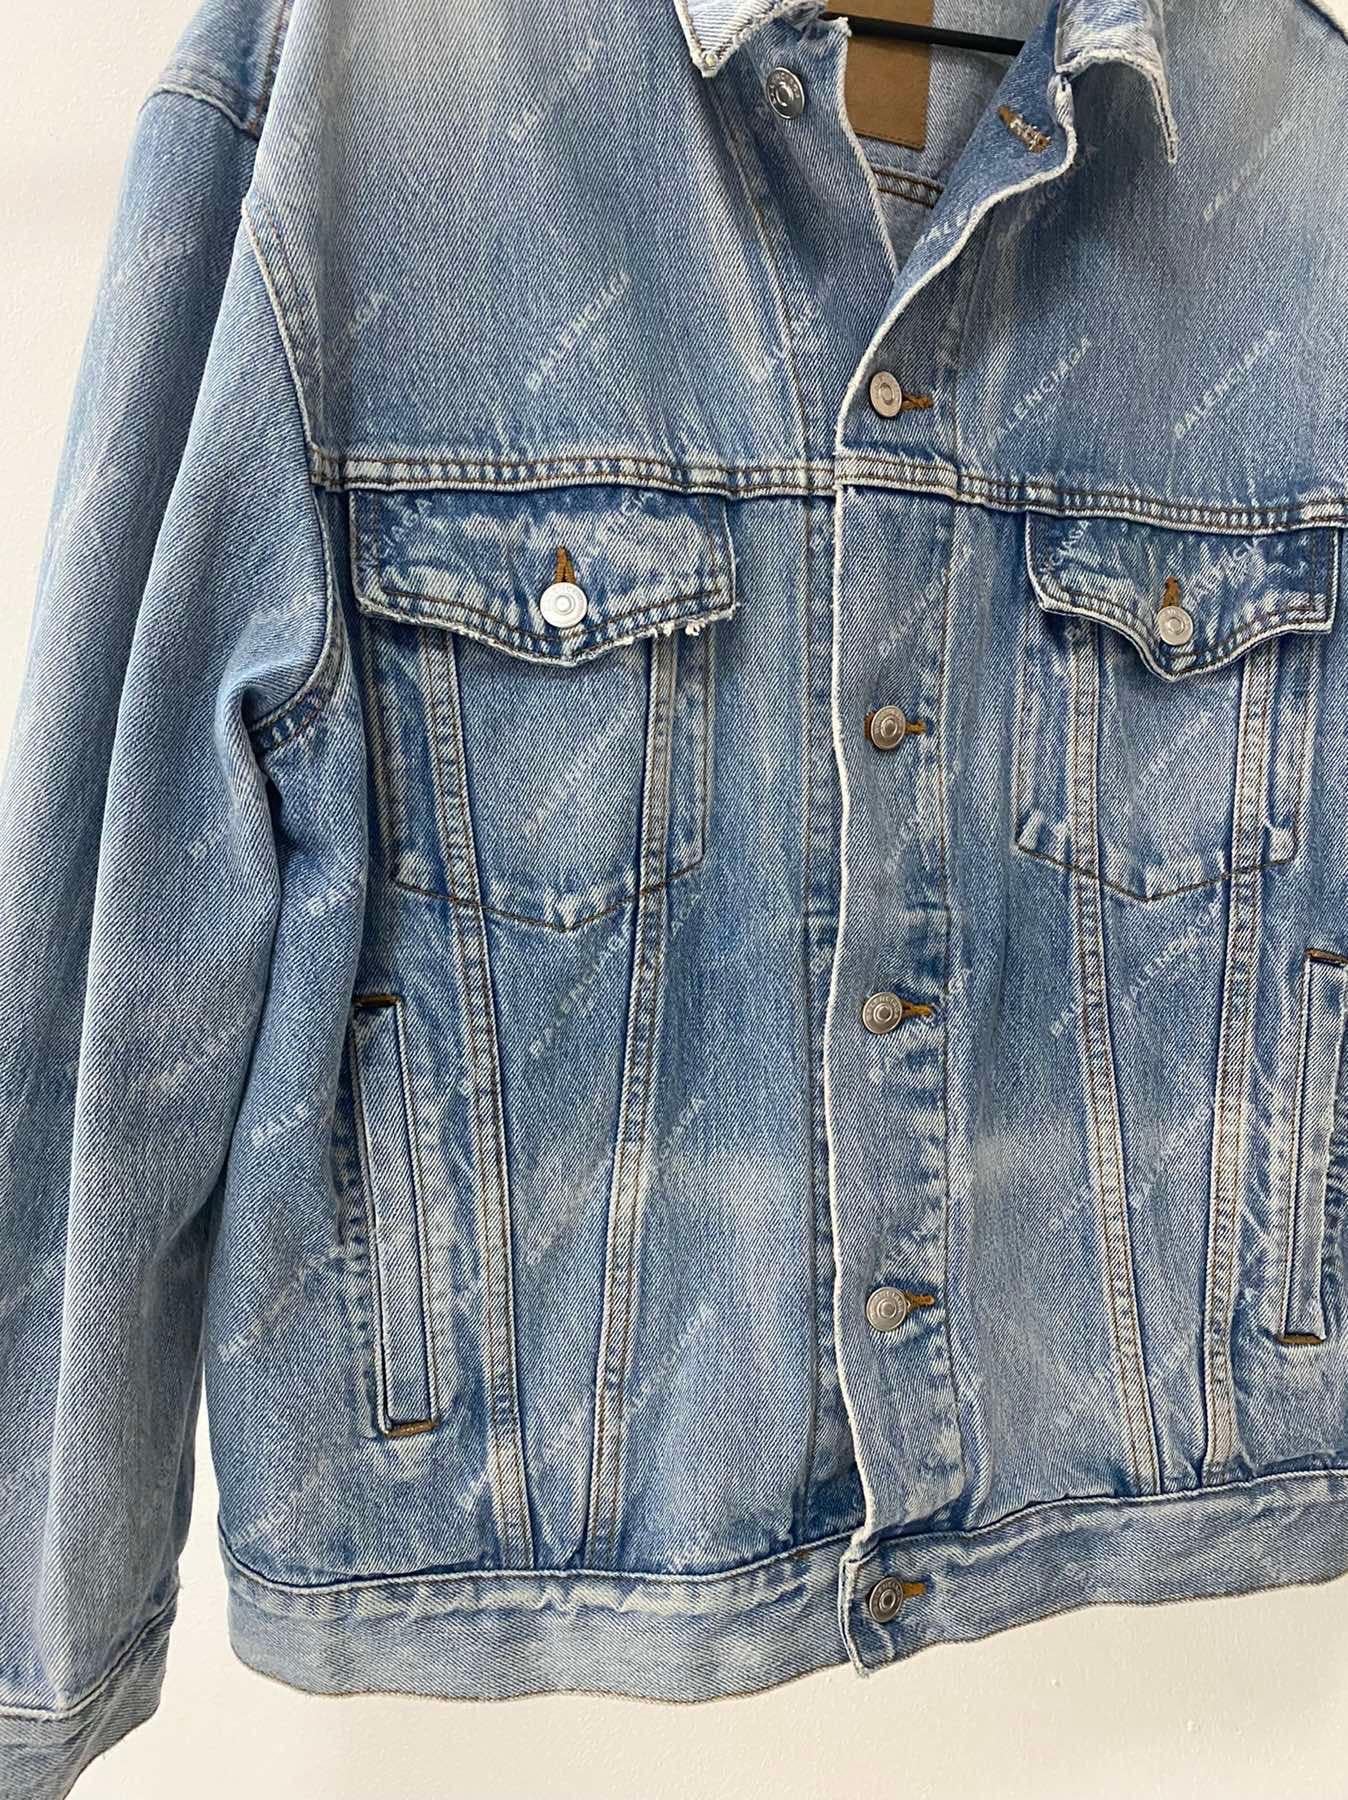 A casual staple like this blue wash Balenciaga denim jacket will go far in your seasonless edit. 
Oversized in fit so that it can be layered over knitwear and casual T-shirts in equal measure, it has faded touches for an essential pre-worn look and